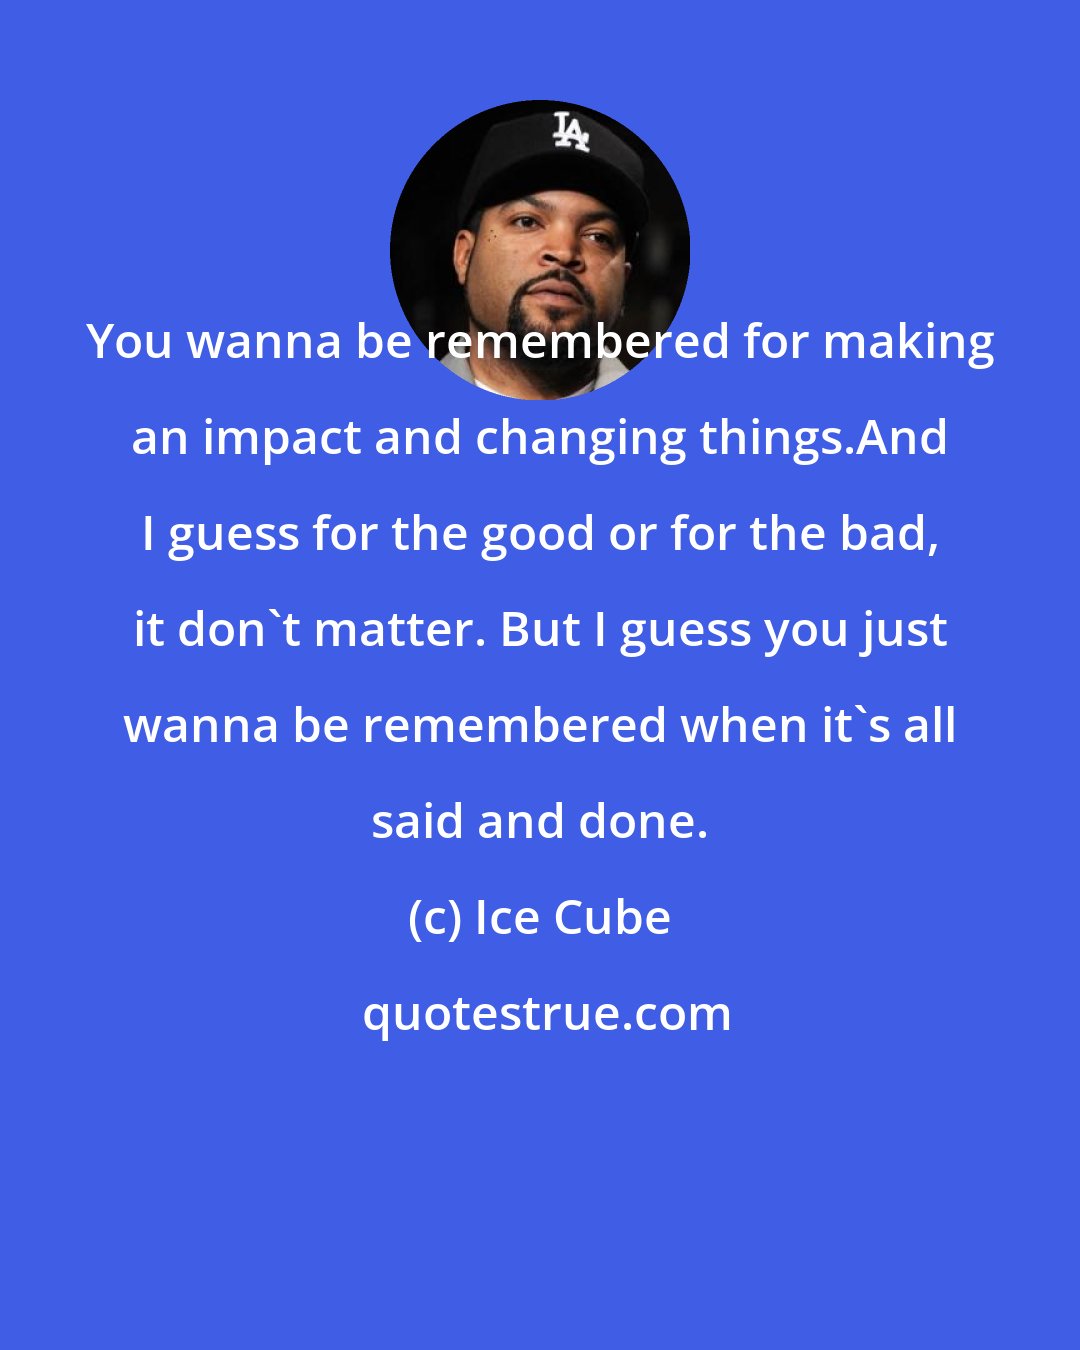 Ice Cube: You wanna be remembered for making an impact and changing things.And I guess for the good or for the bad, it don't matter. But I guess you just wanna be remembered when it's all said and done.